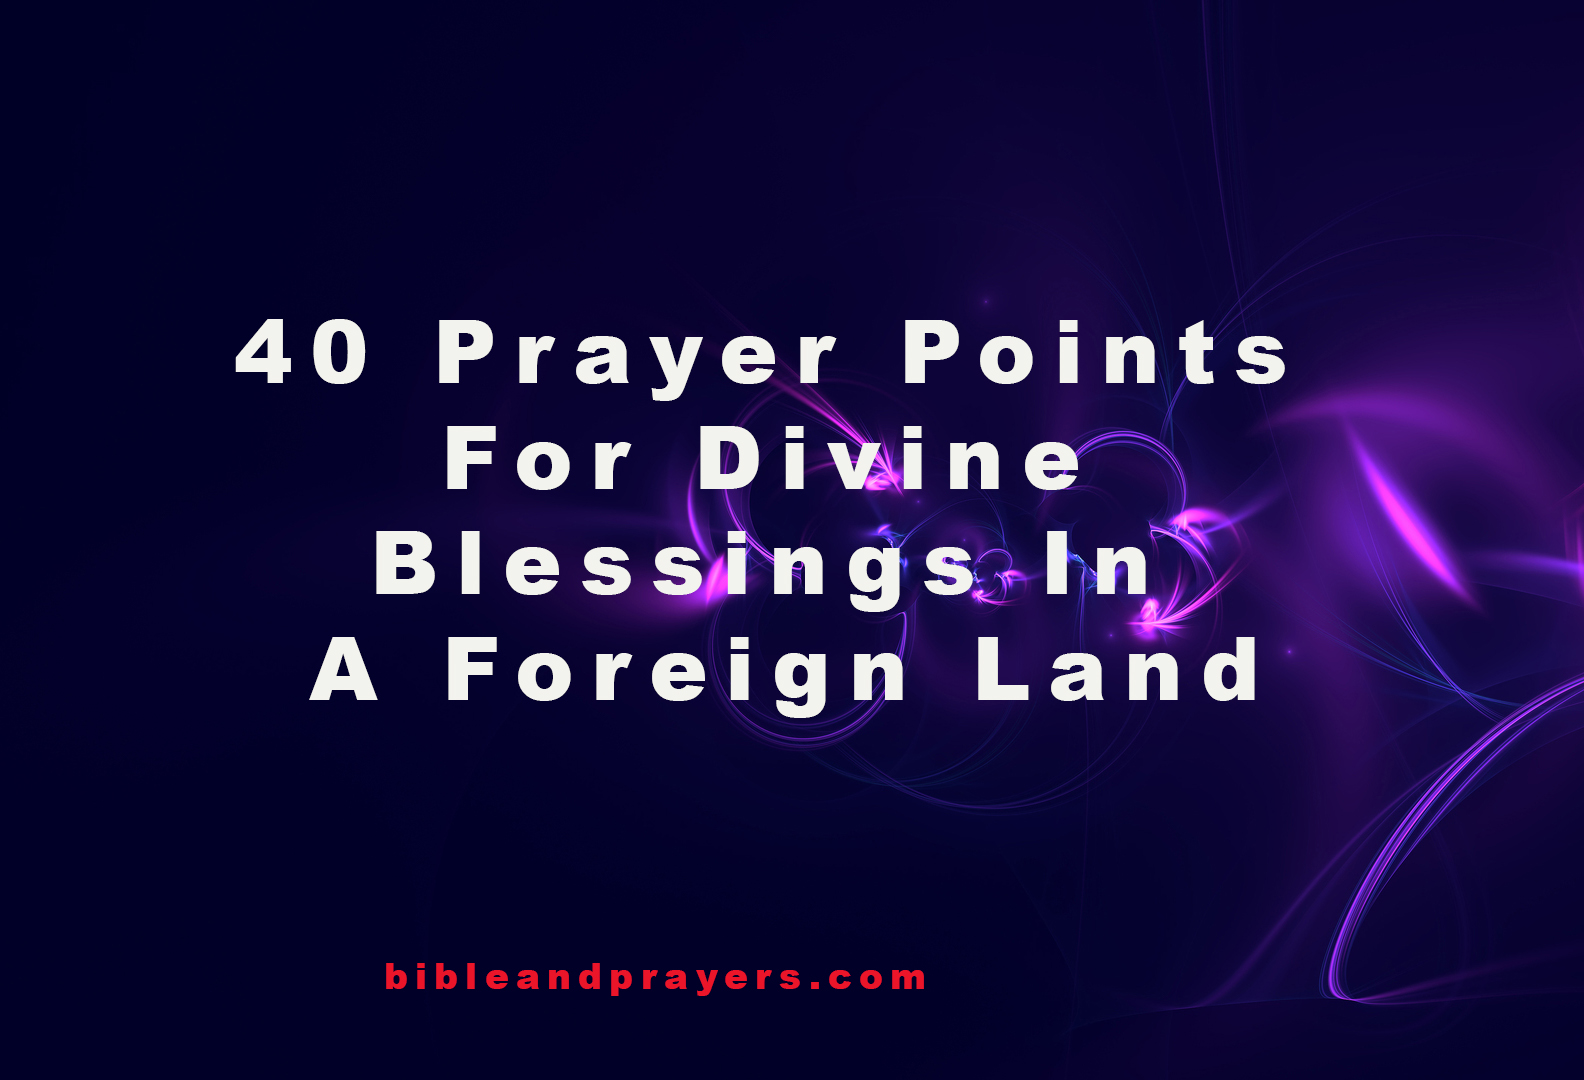 Divine Blessings In A Foreign Land